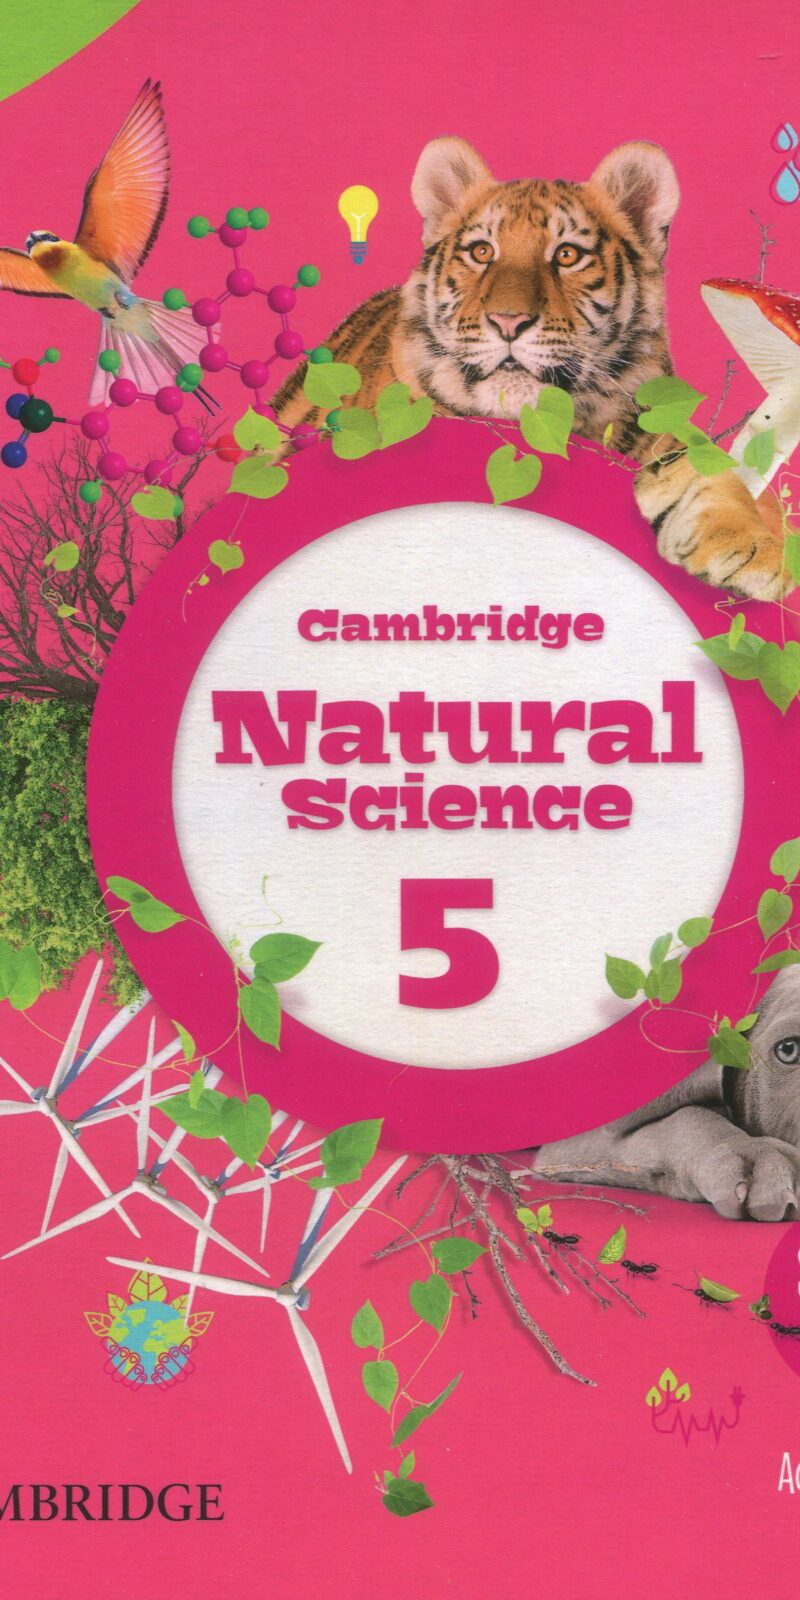 Cambridge Natural Science Level 5 Activity Book with Digital Pack 9788413226088